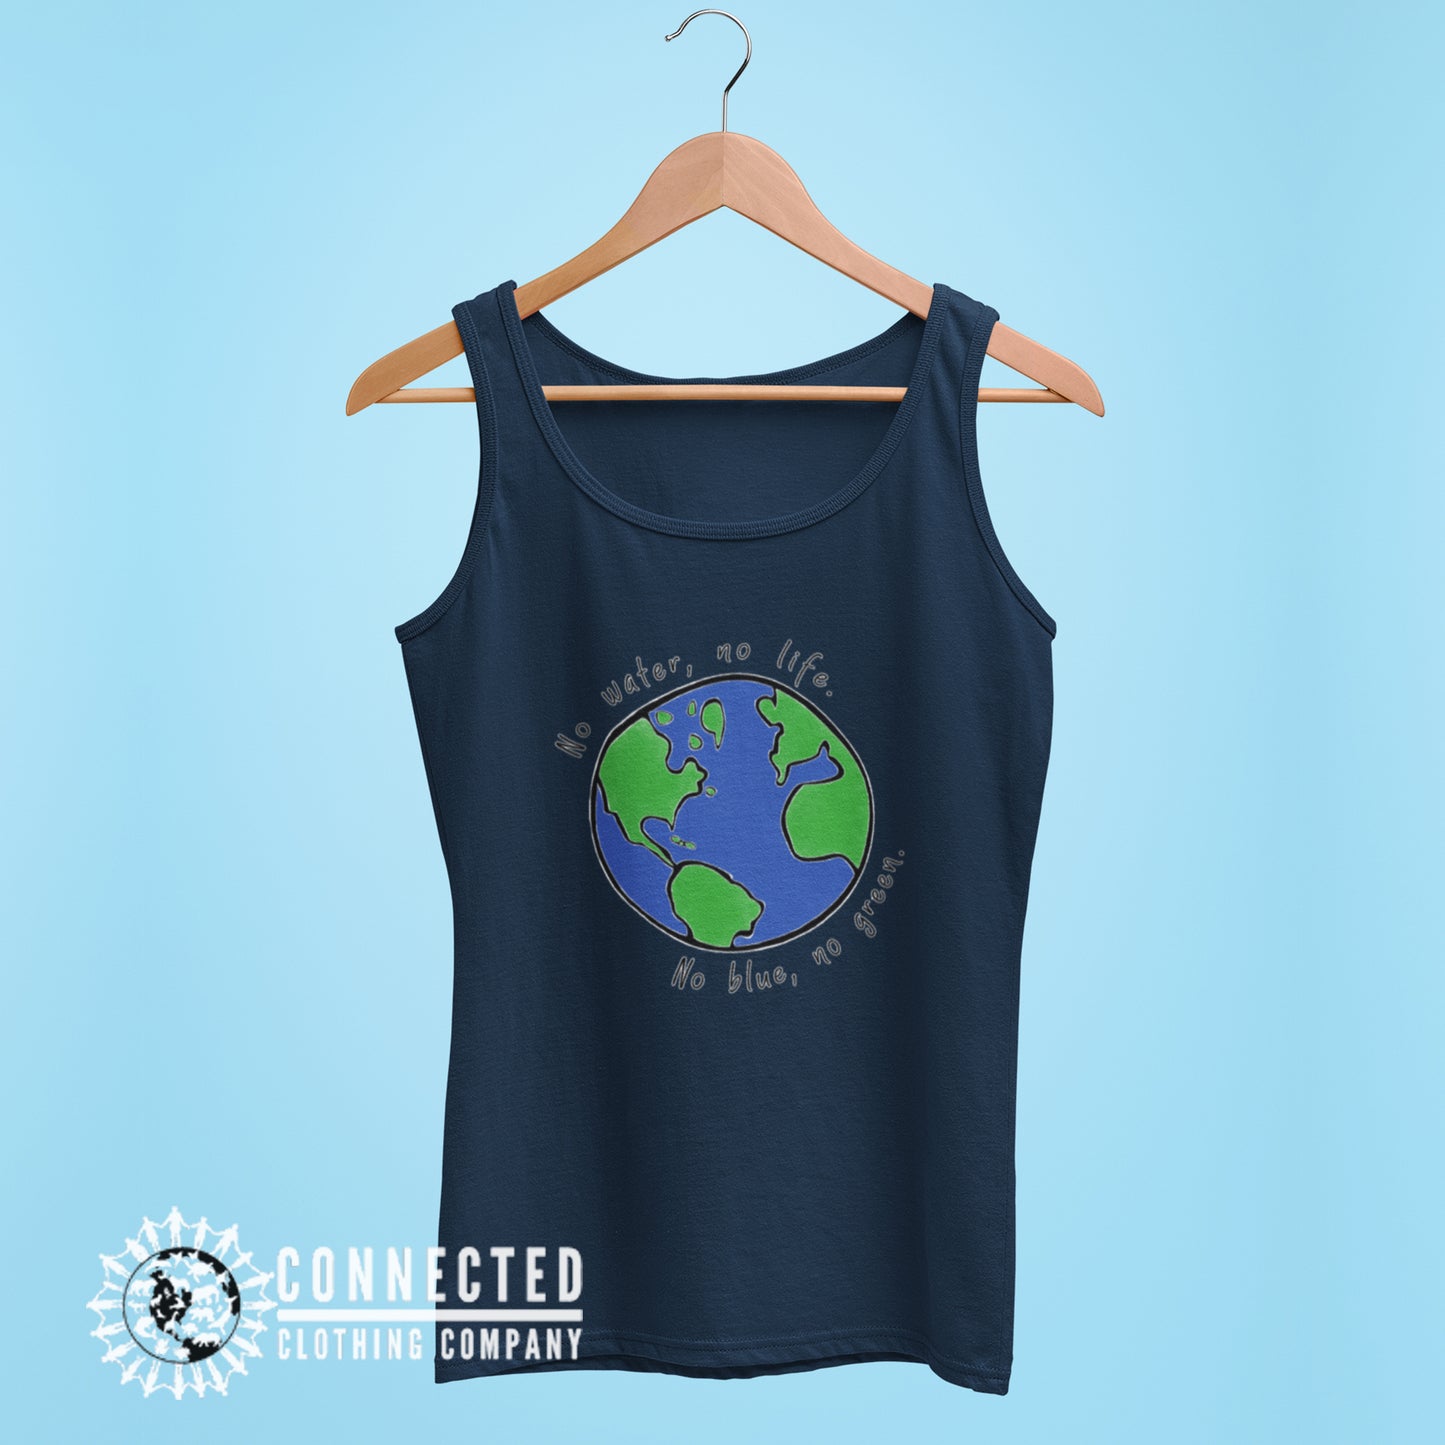 Navy No Blue No Green Women's Relaxed Tank - Connected Clothing Company - Ethically and Sustainably Made - 10% of profits donated to Mission Blue ocean conservation